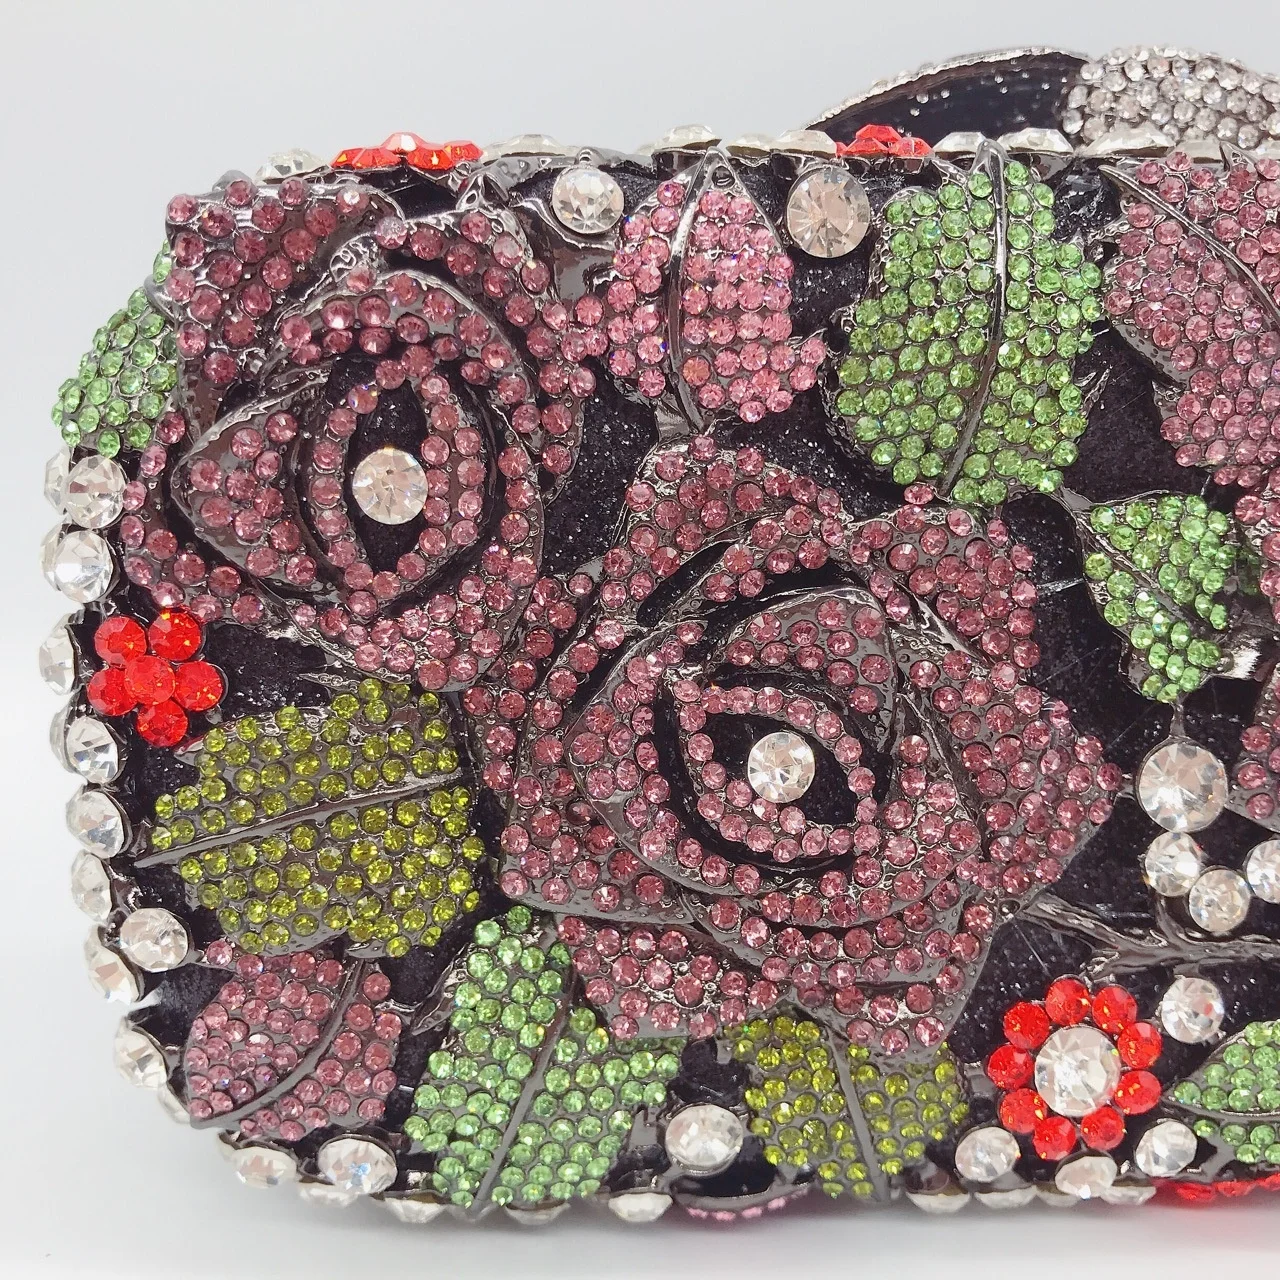 Amiqi MRY92 Luxury Handmade Sequin and beaded flower crystal ladies clutch bag clutches evening bag